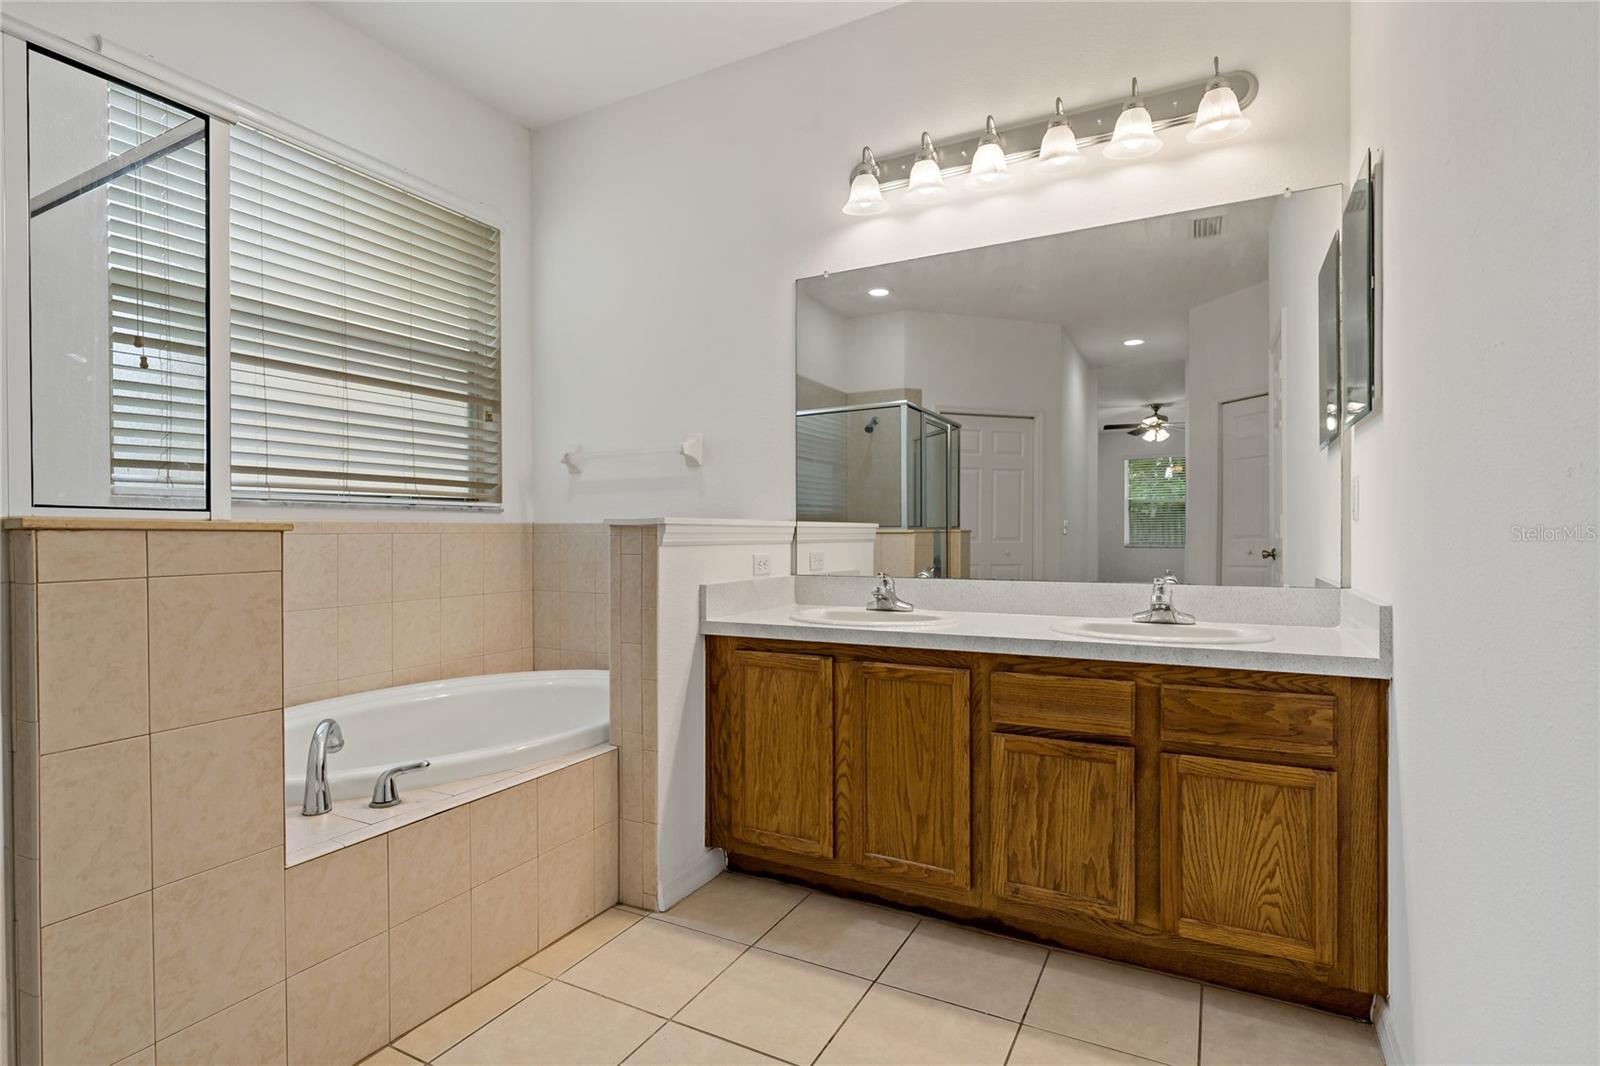 Double Sinks and Garden Tub